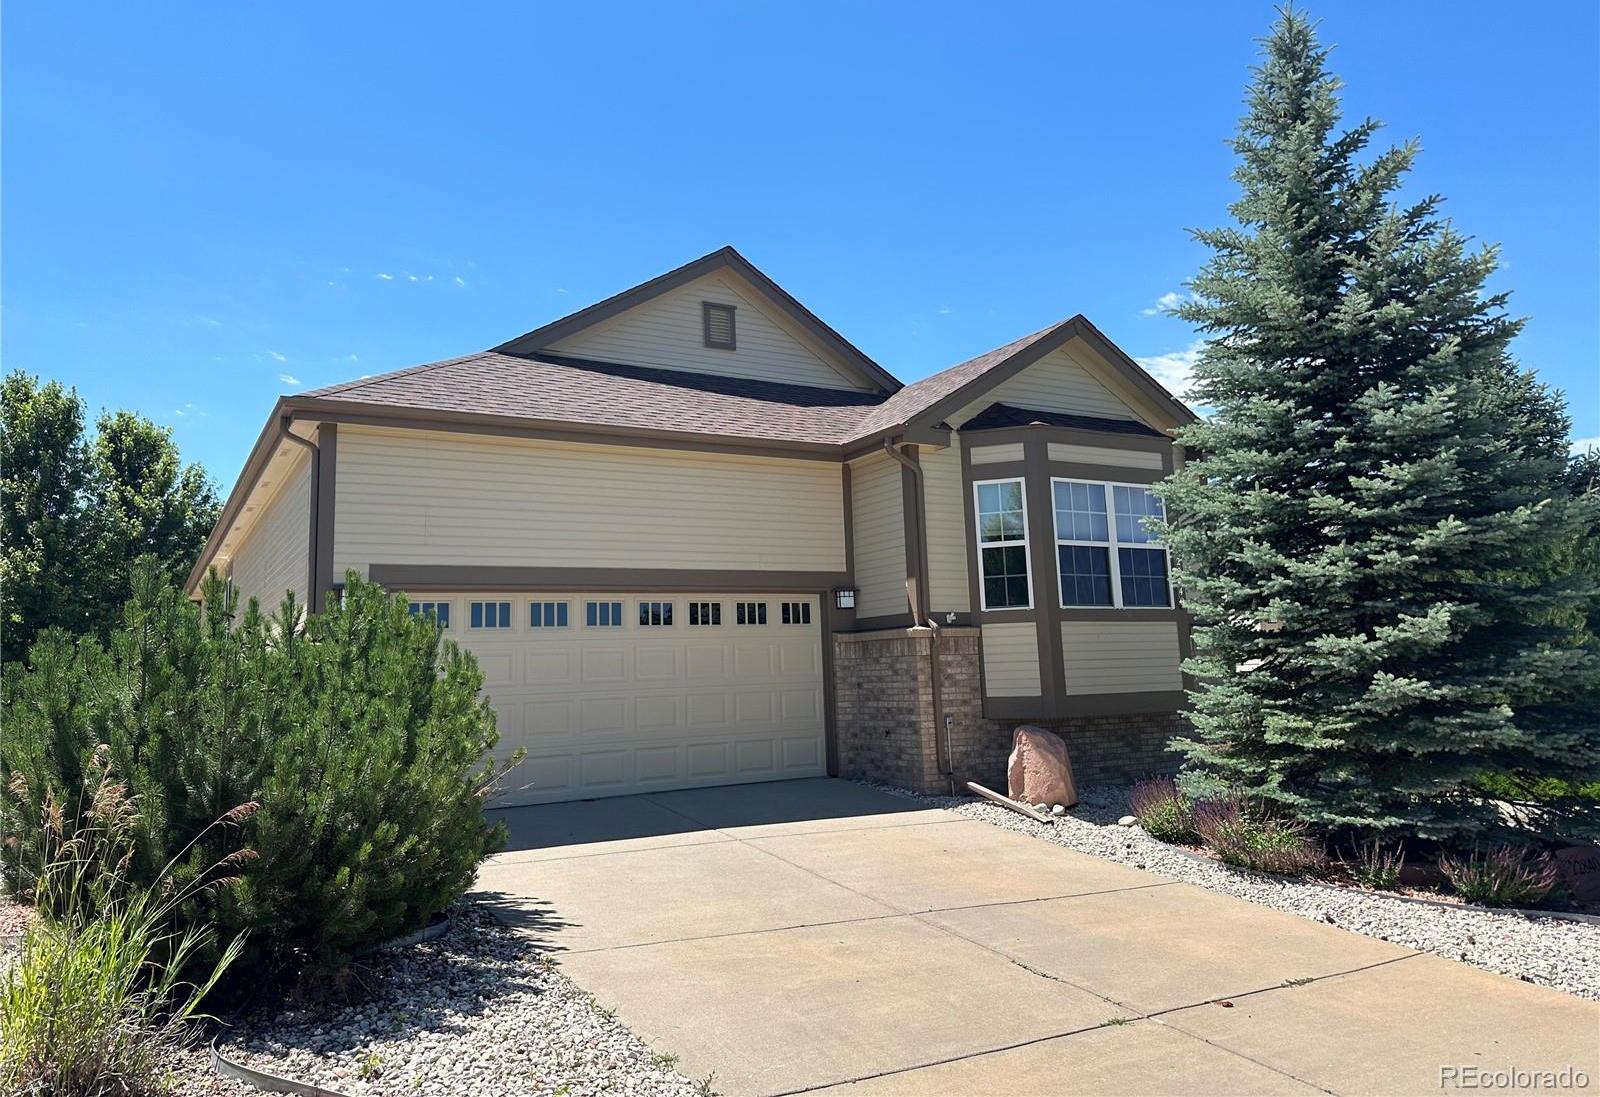 Photo one of 22840 E Heritage Pkwy Aurora CO 80016 | MLS 7694162